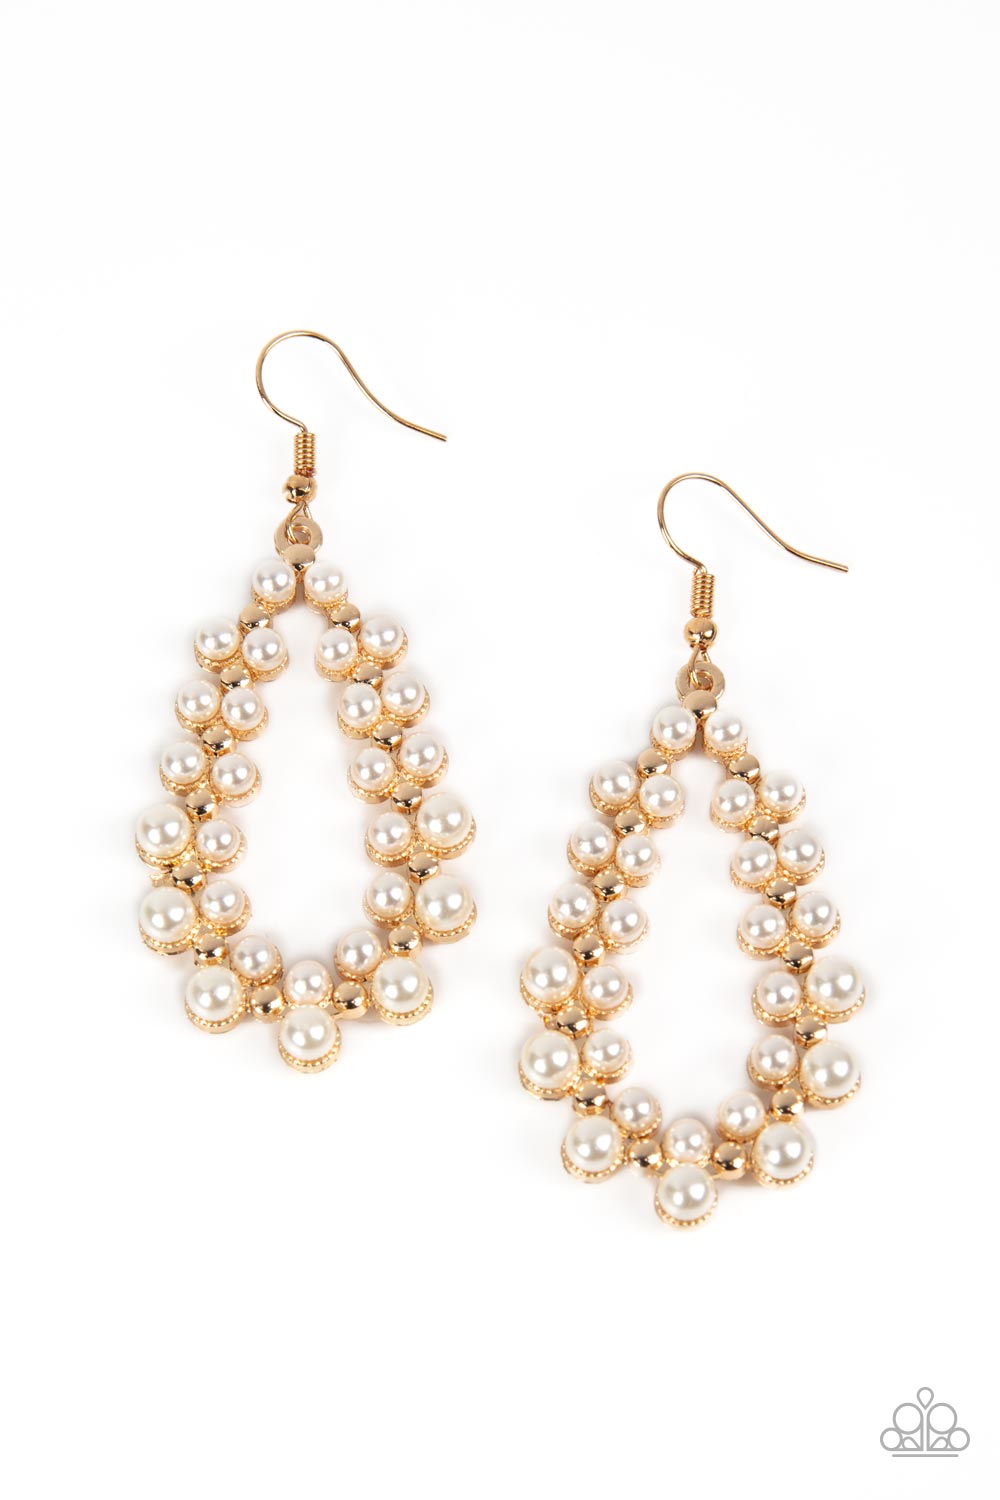 ABSOLUTELY AGELESS GOLD-EARRINGS